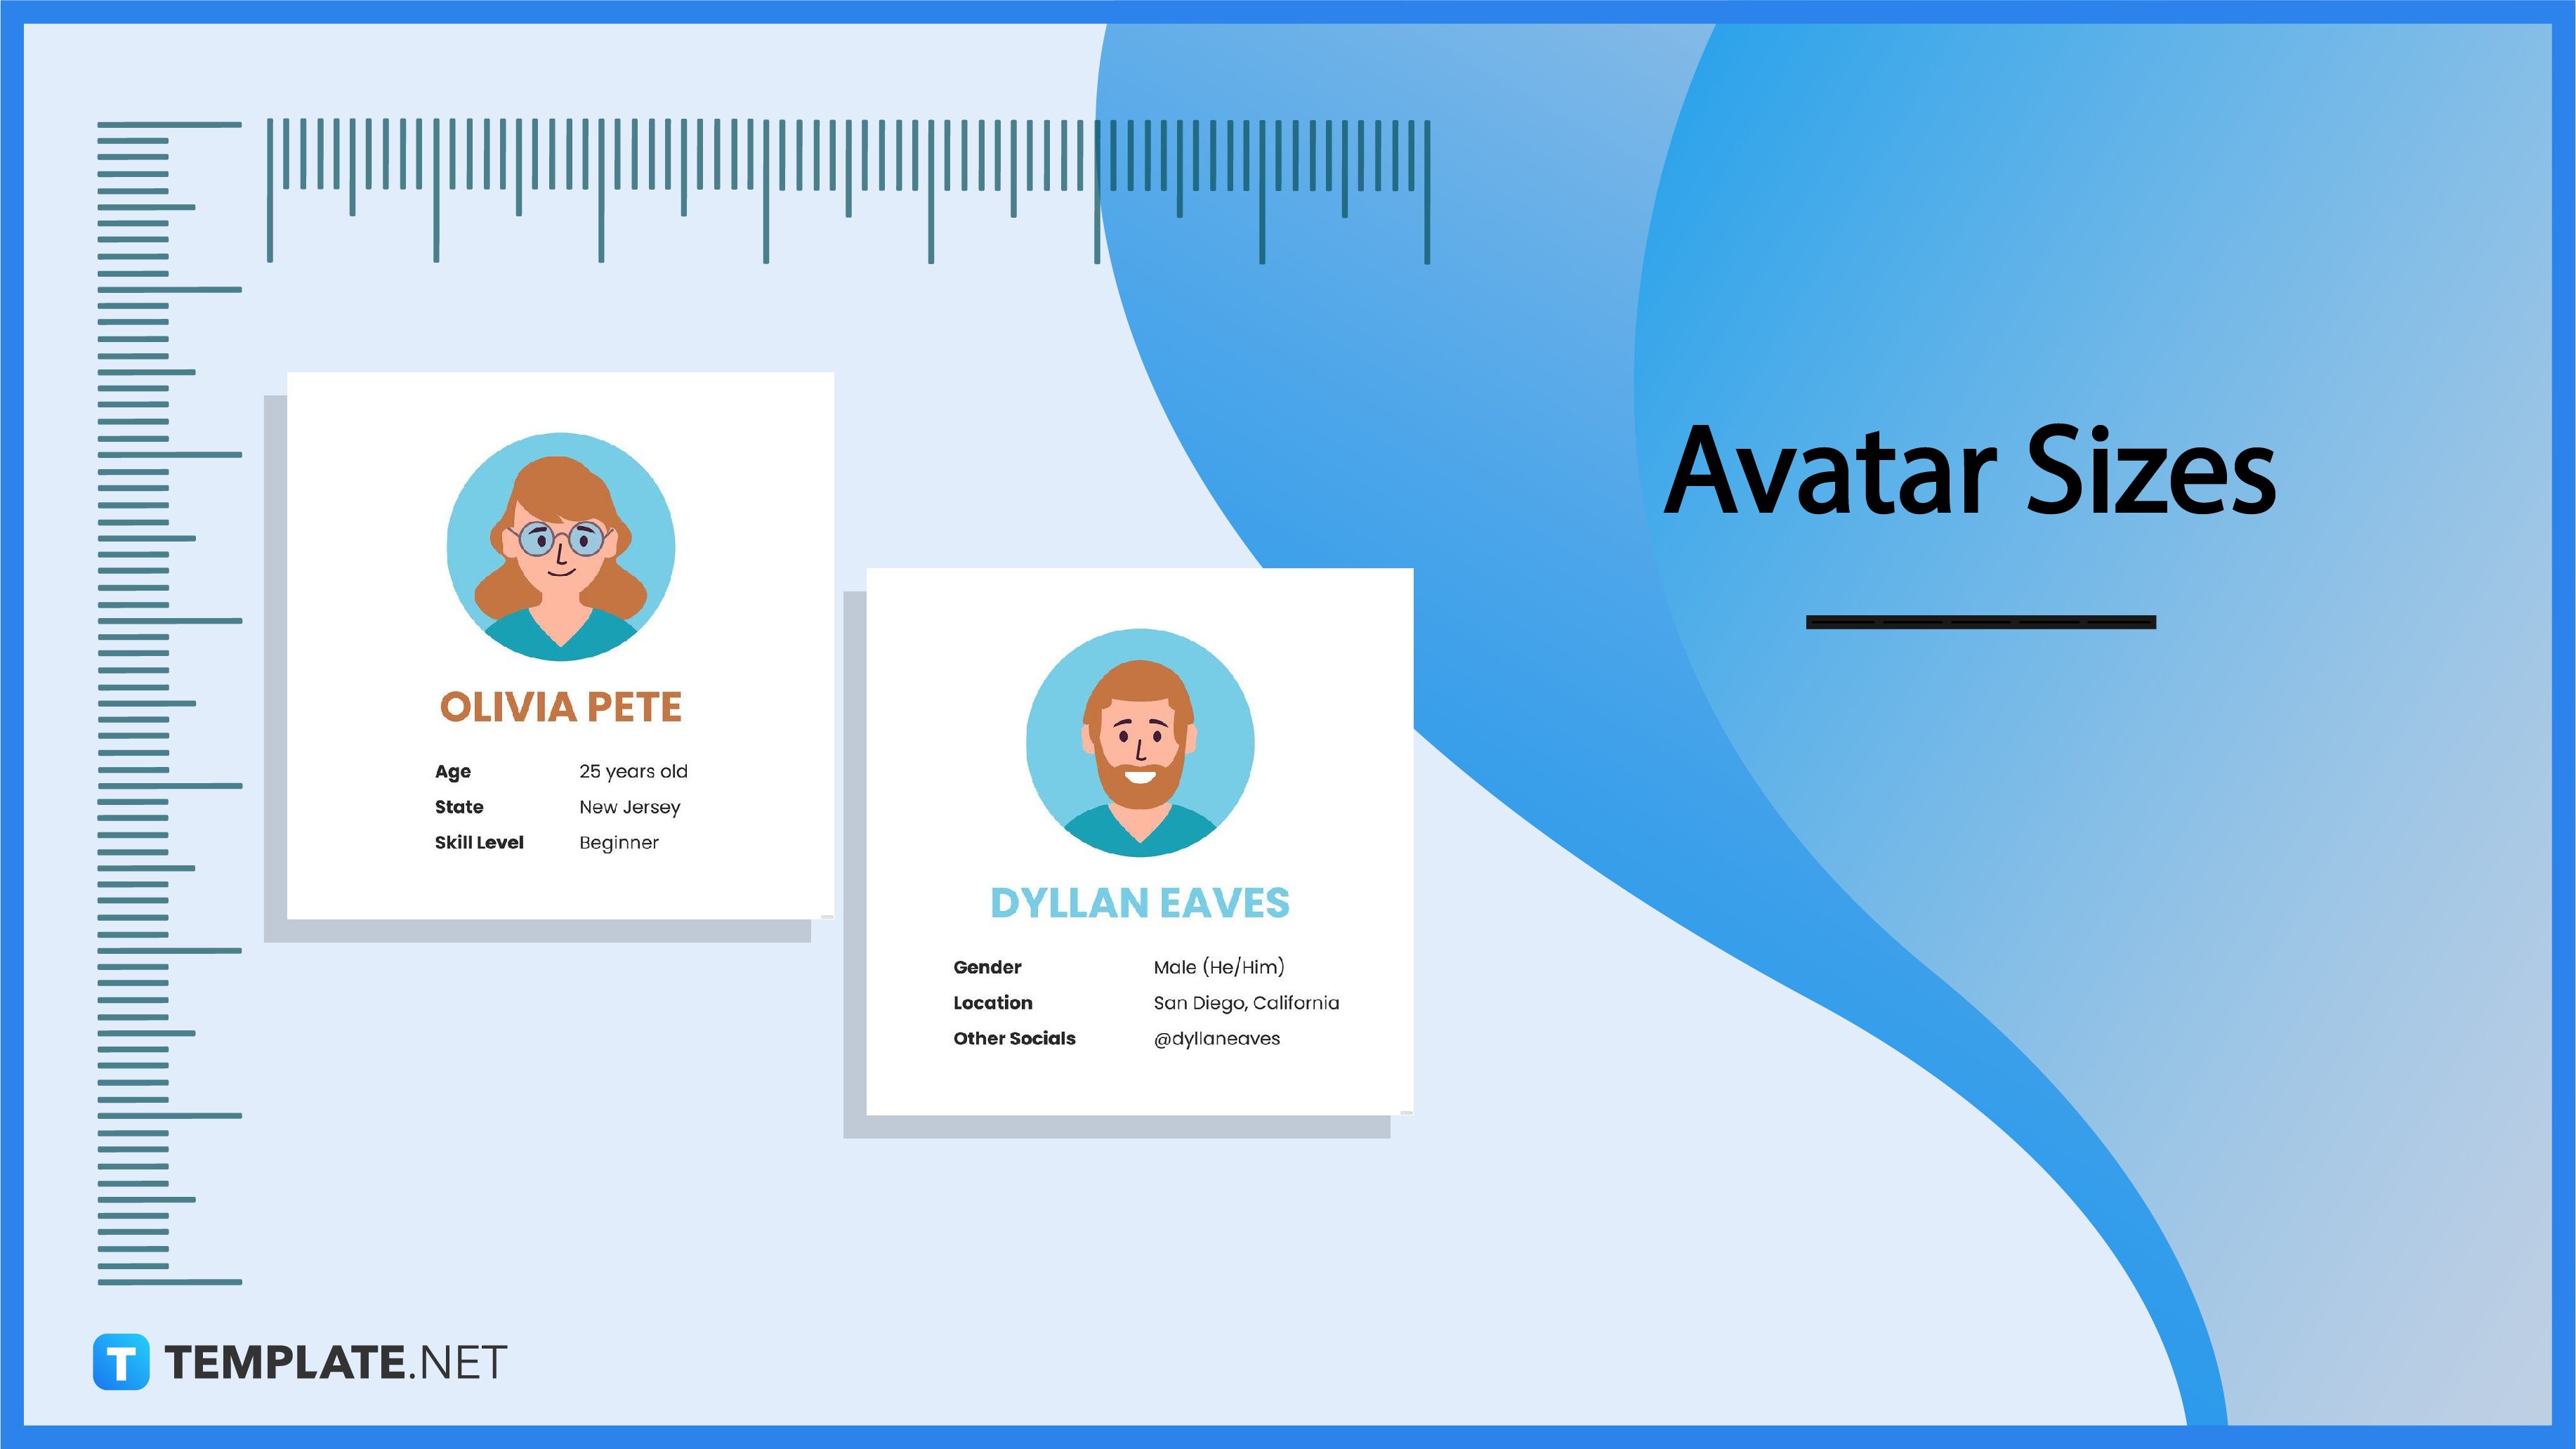 Avatar Size Comparison  The Biggest Characters of Avatar Size Comparison   YouTube